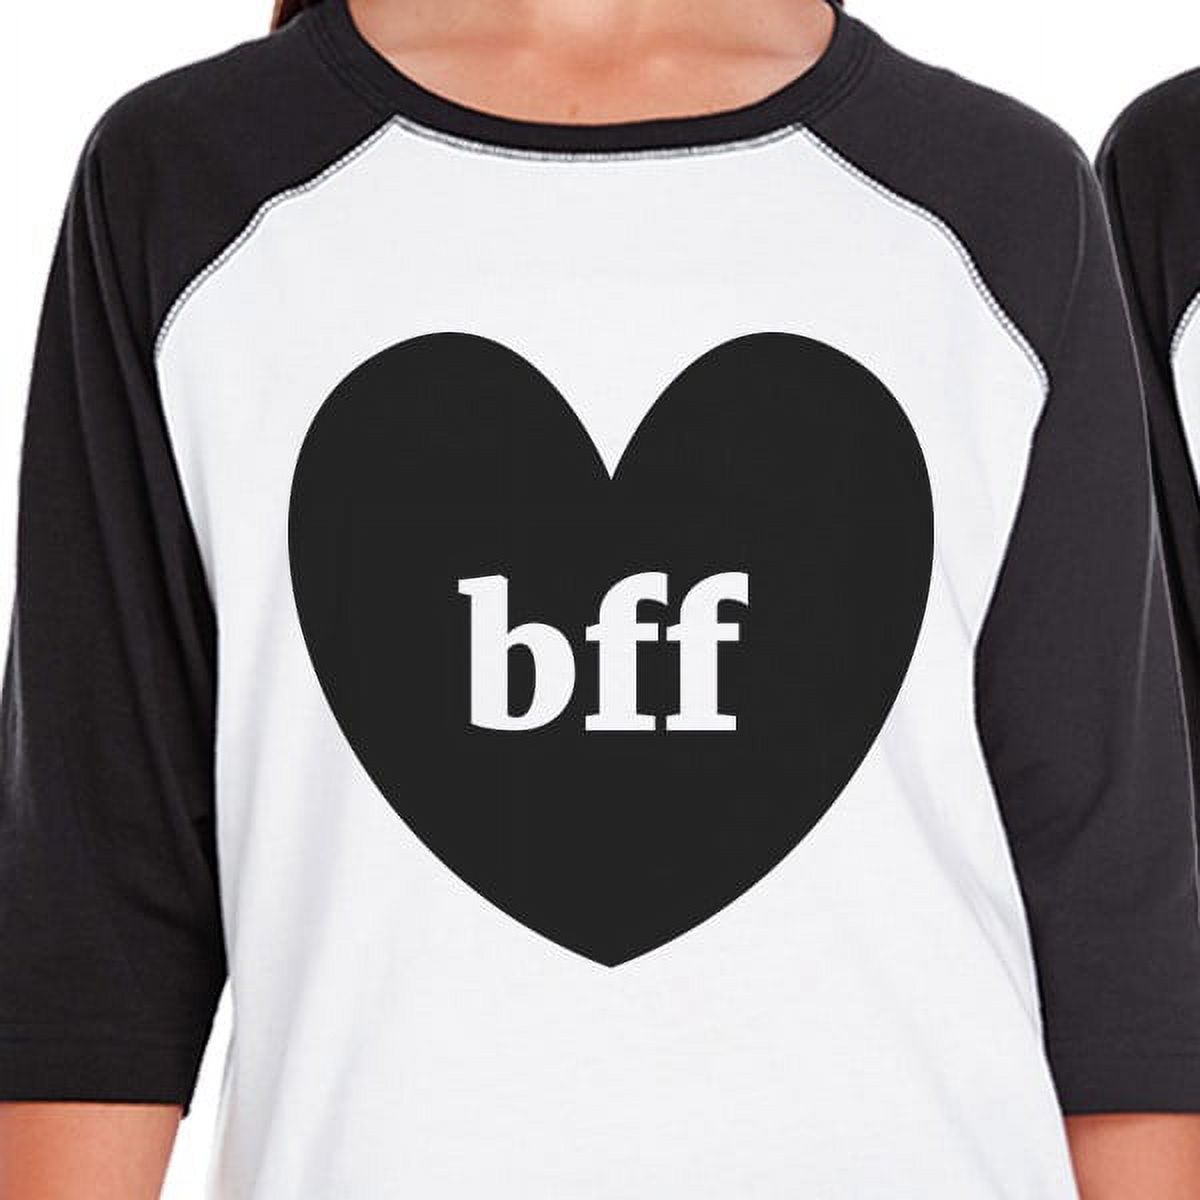 Bff Heart BFF Matching T-Shirts Funny Graphic Baseball Tees Gifts - image 2 of 4